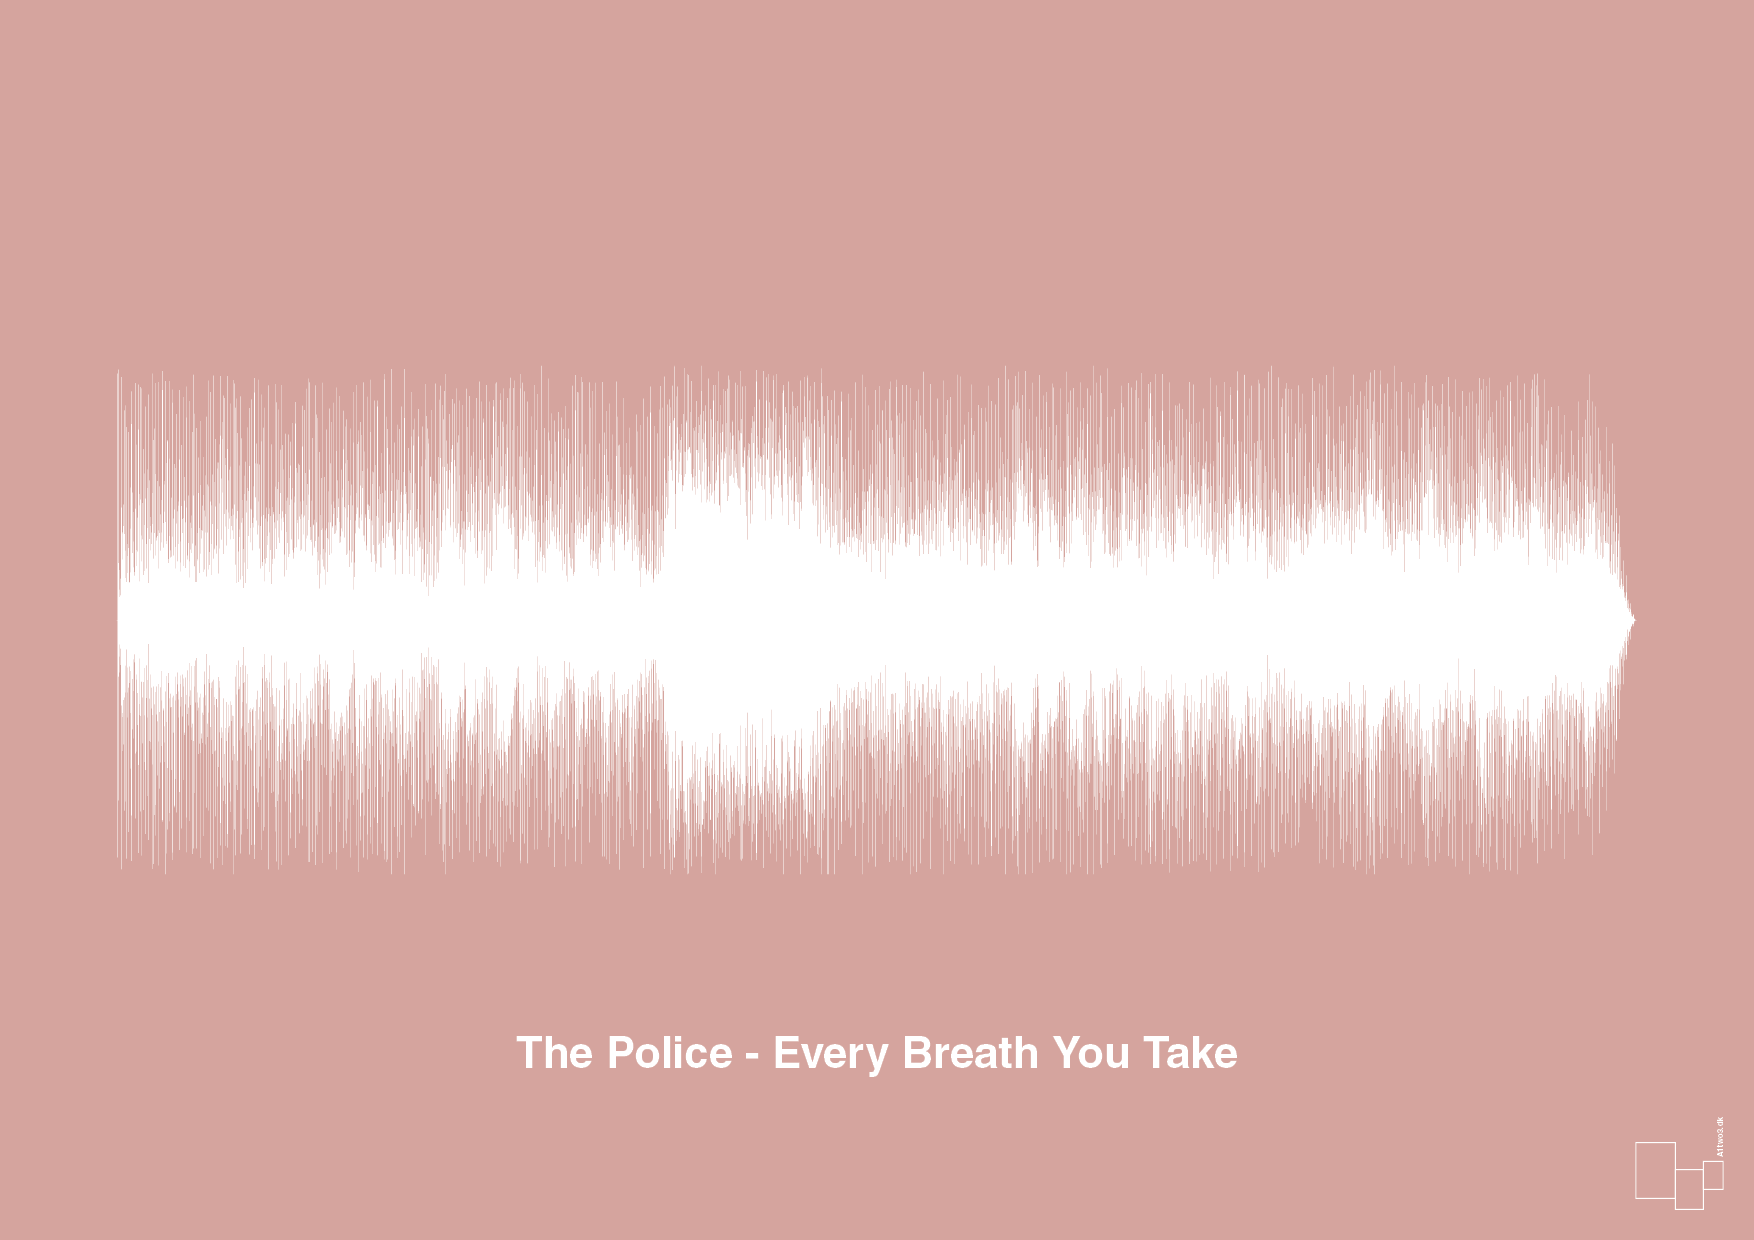 the police - every breath you take - Plakat med Musik i Bubble Shell